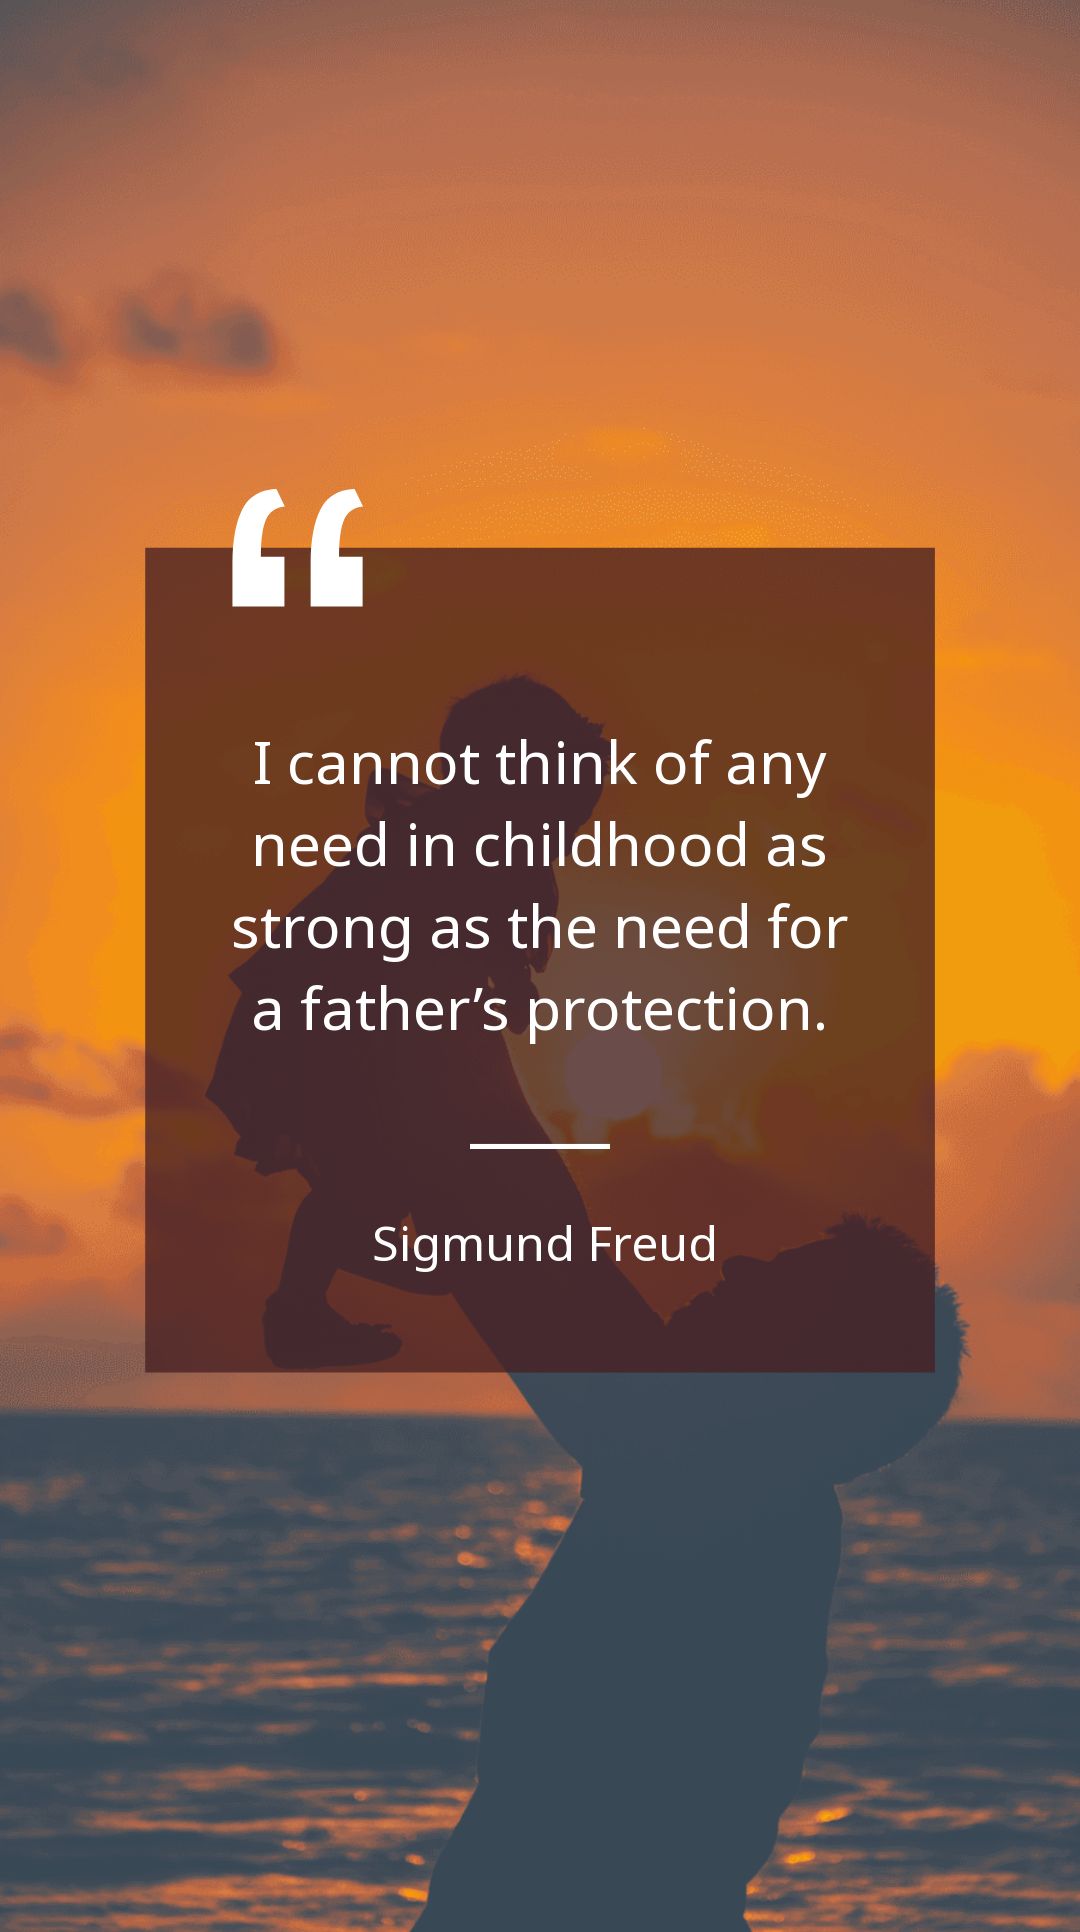 Sigmund Freud - I cannot think of any need in childhood as strong as the need for a father’s protection.